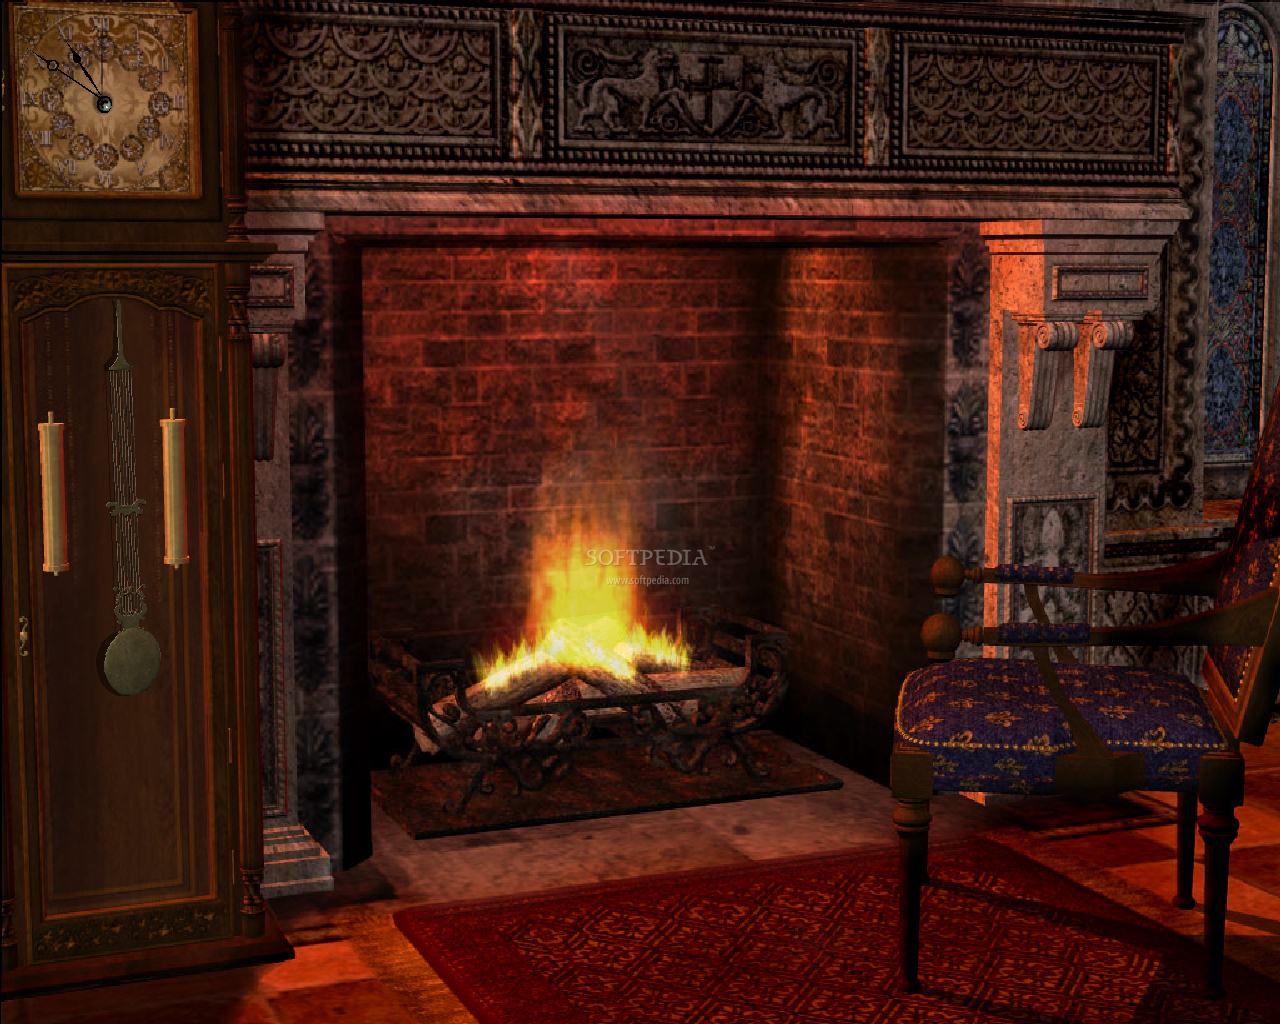 Gothic Fireplace Animated Screensaver This Is The Image Displayed